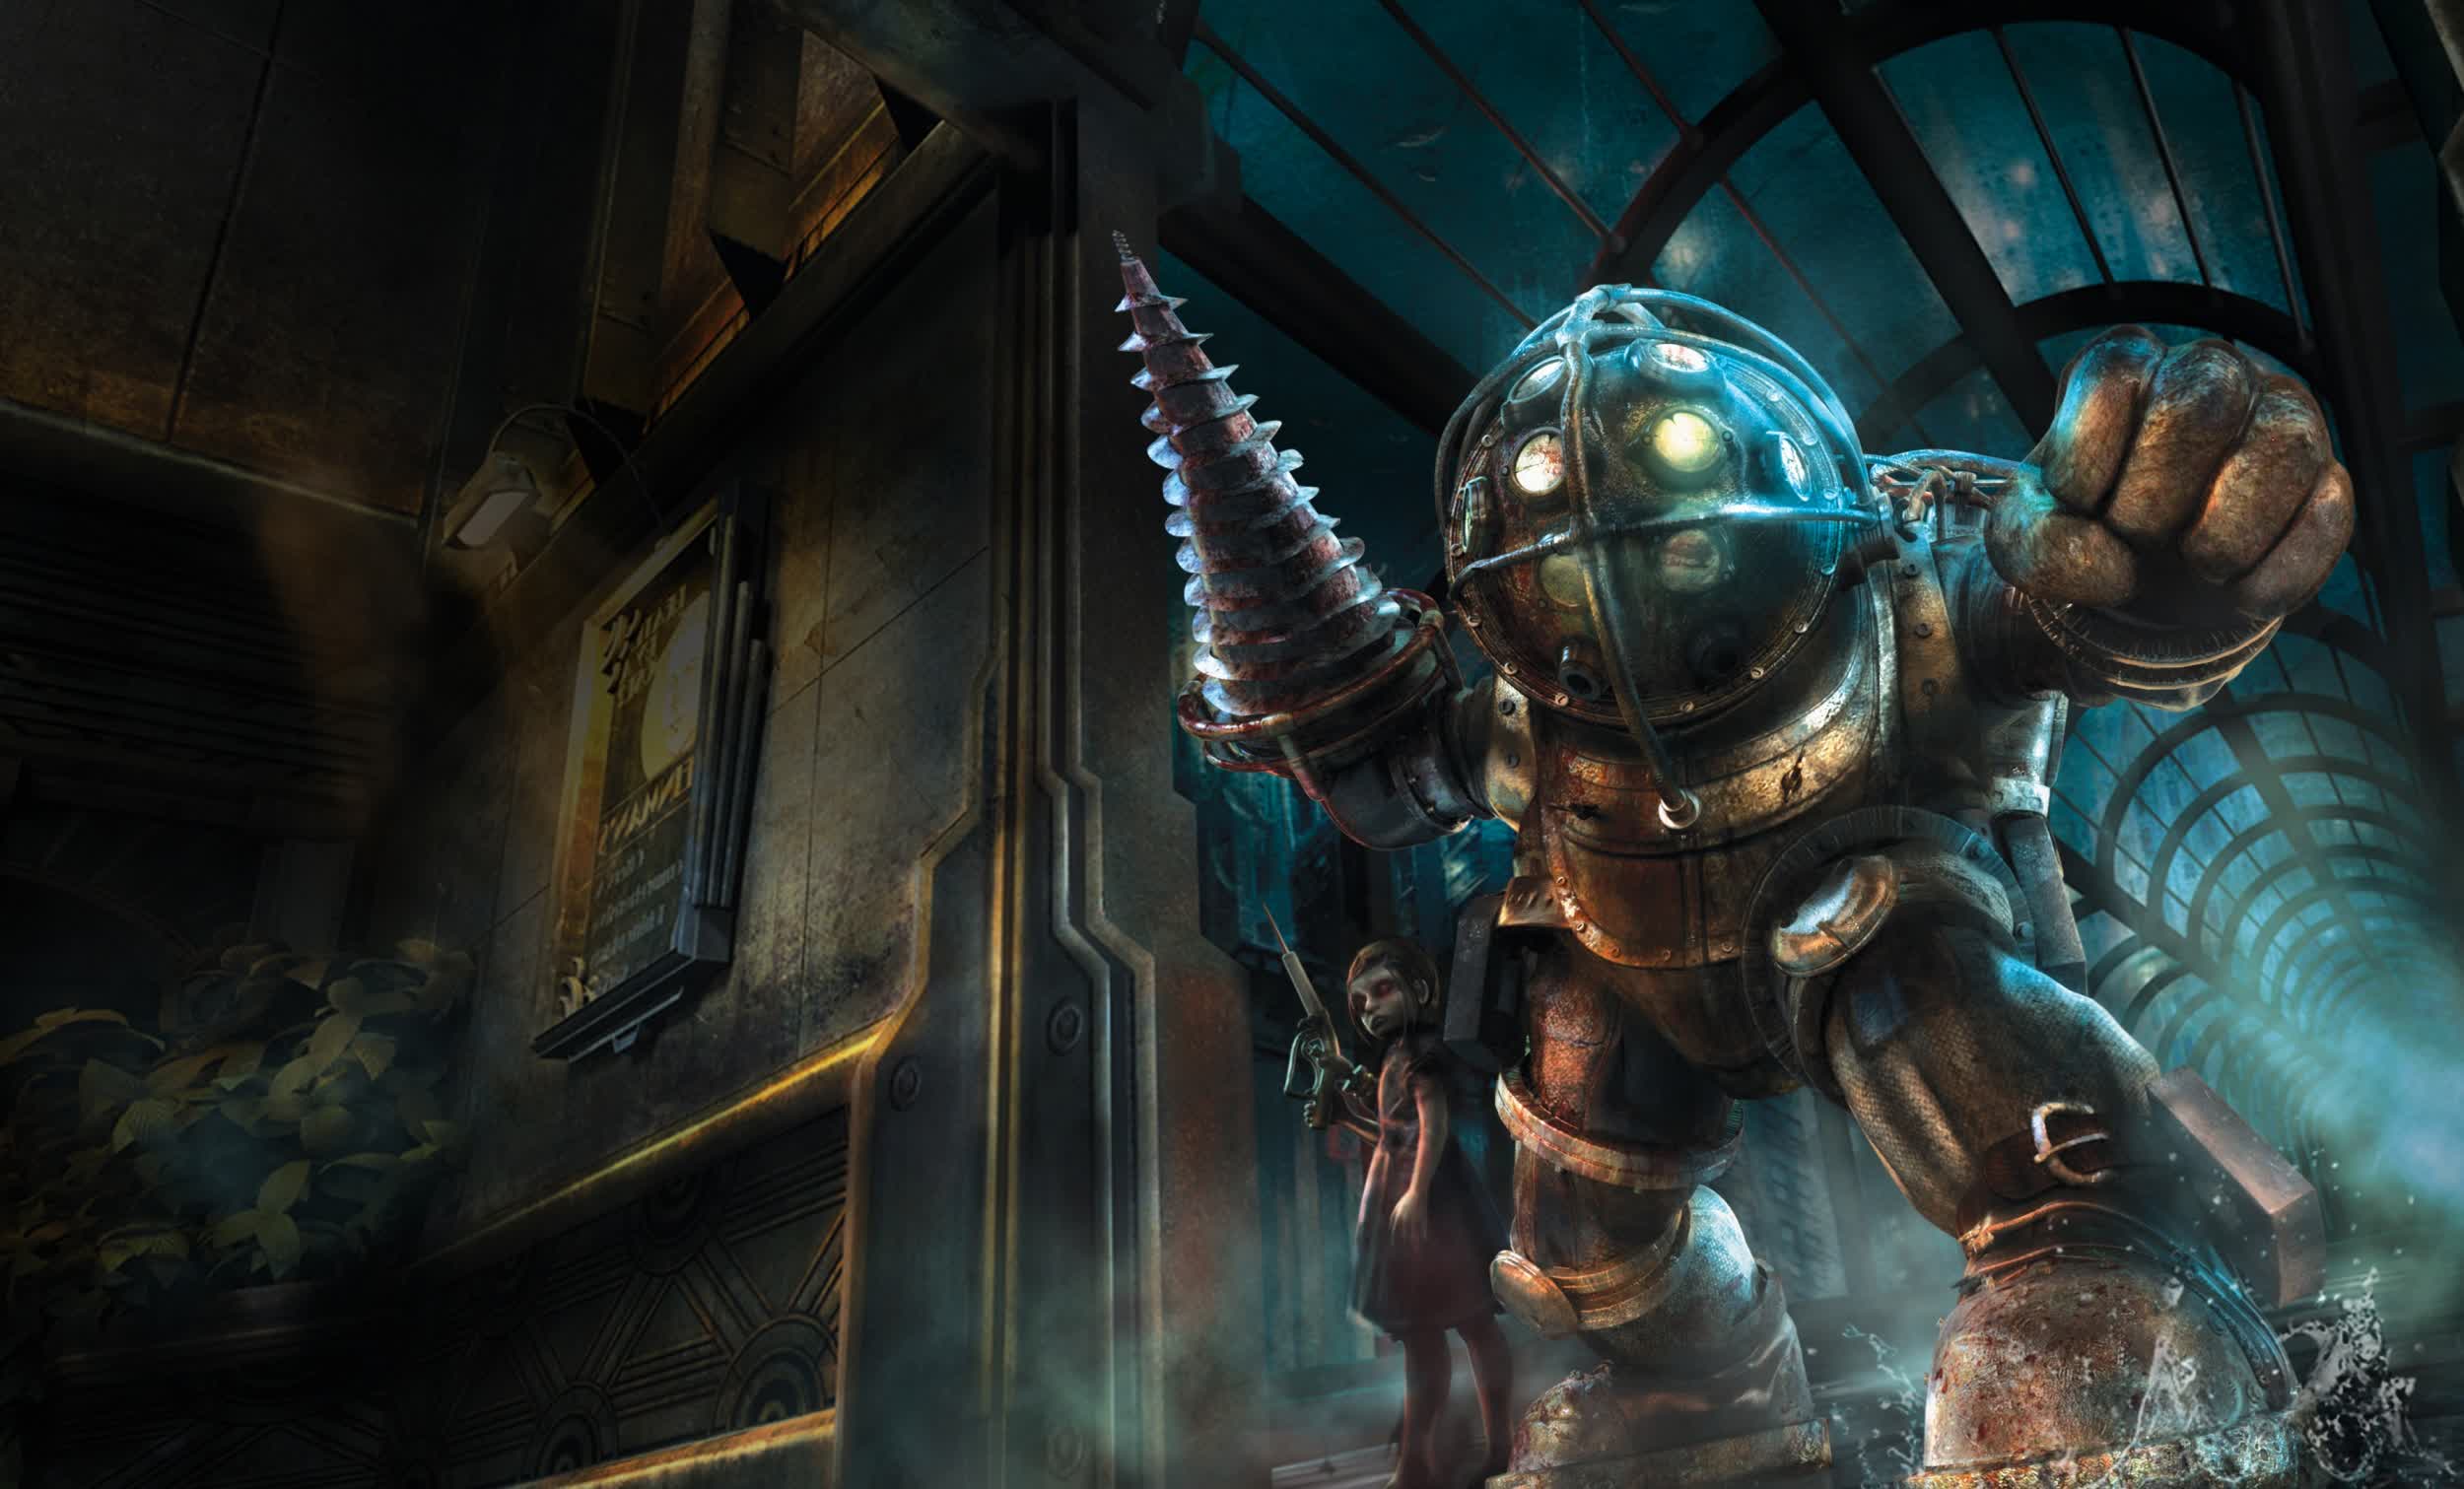 Netflix is partnering with 2K Games on a live-action BioShock movie